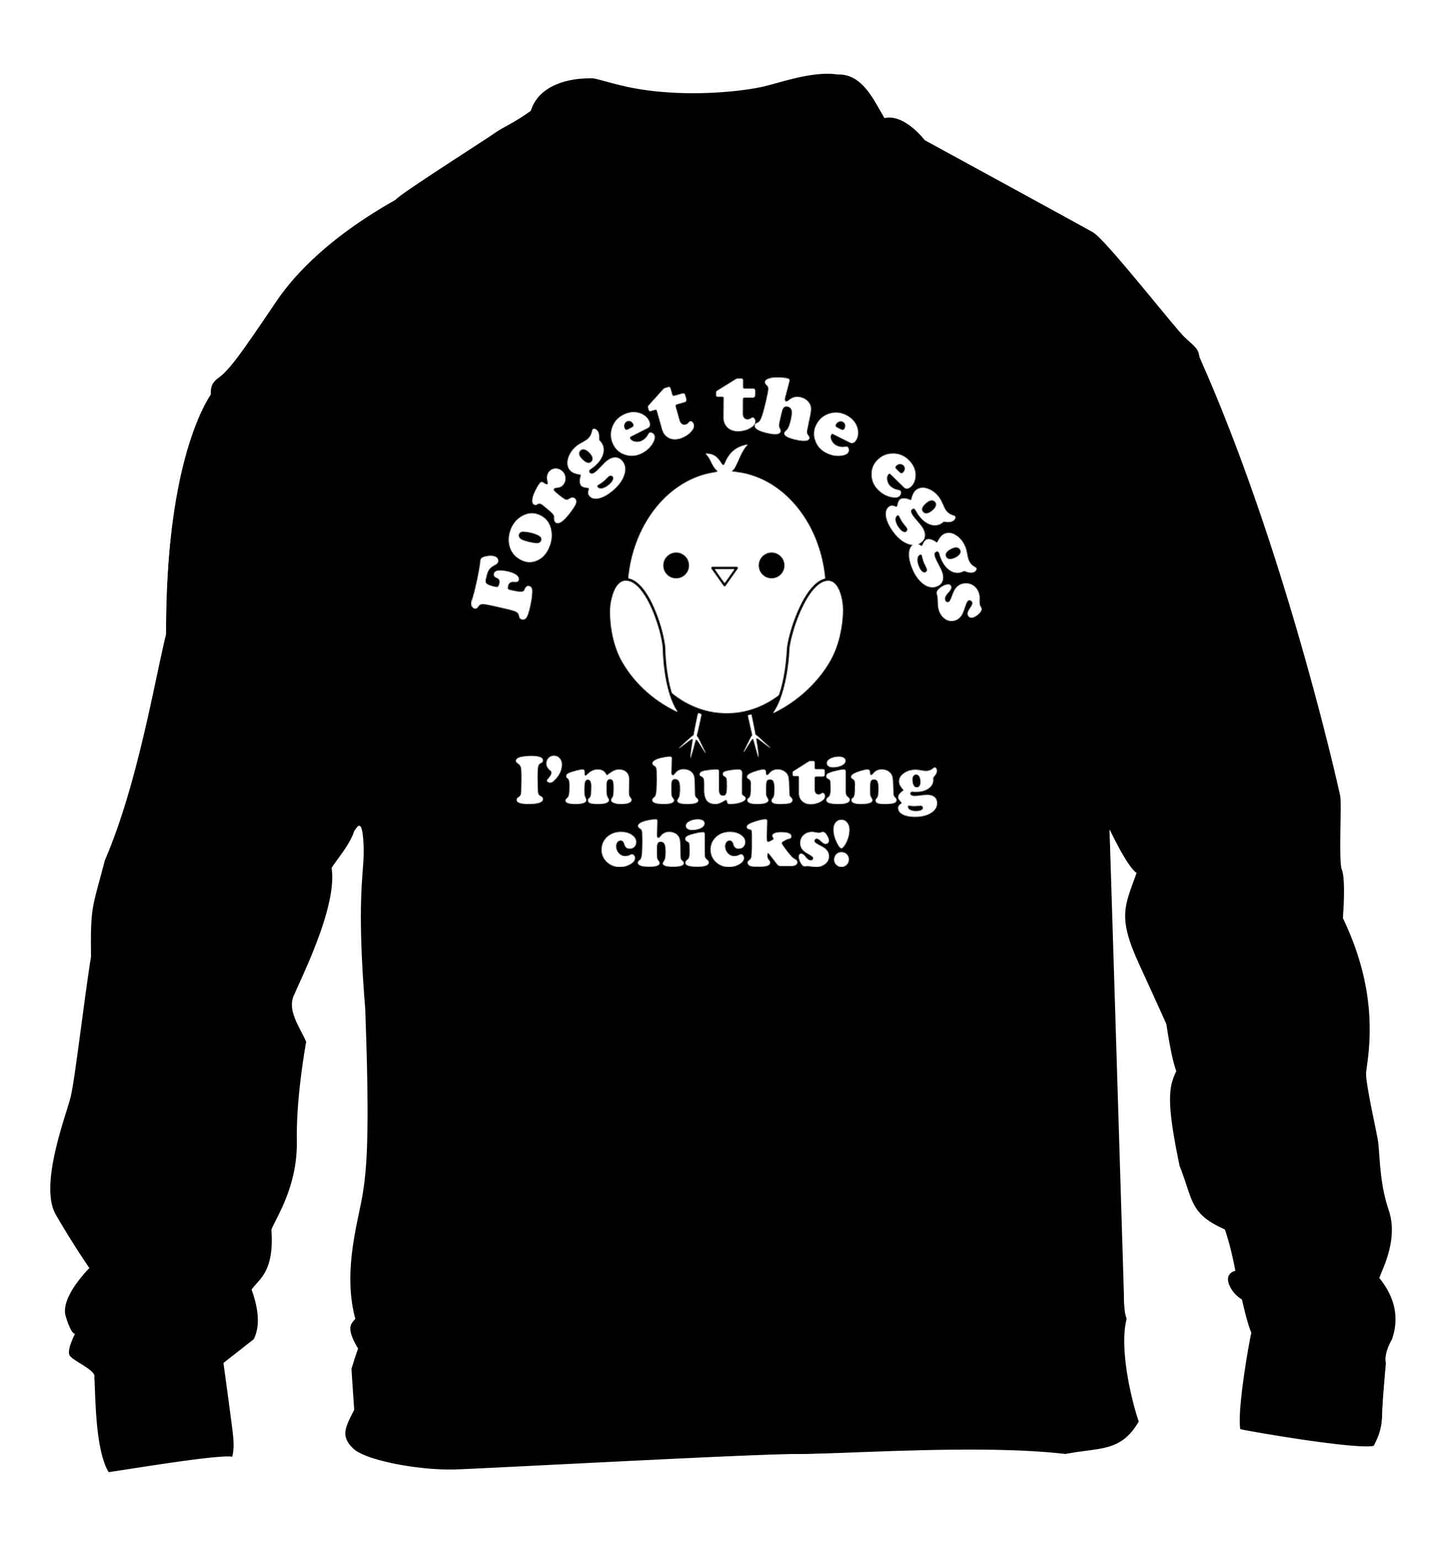 Forget the eggs I'm hunting chicks! children's black sweater 12-13 Years